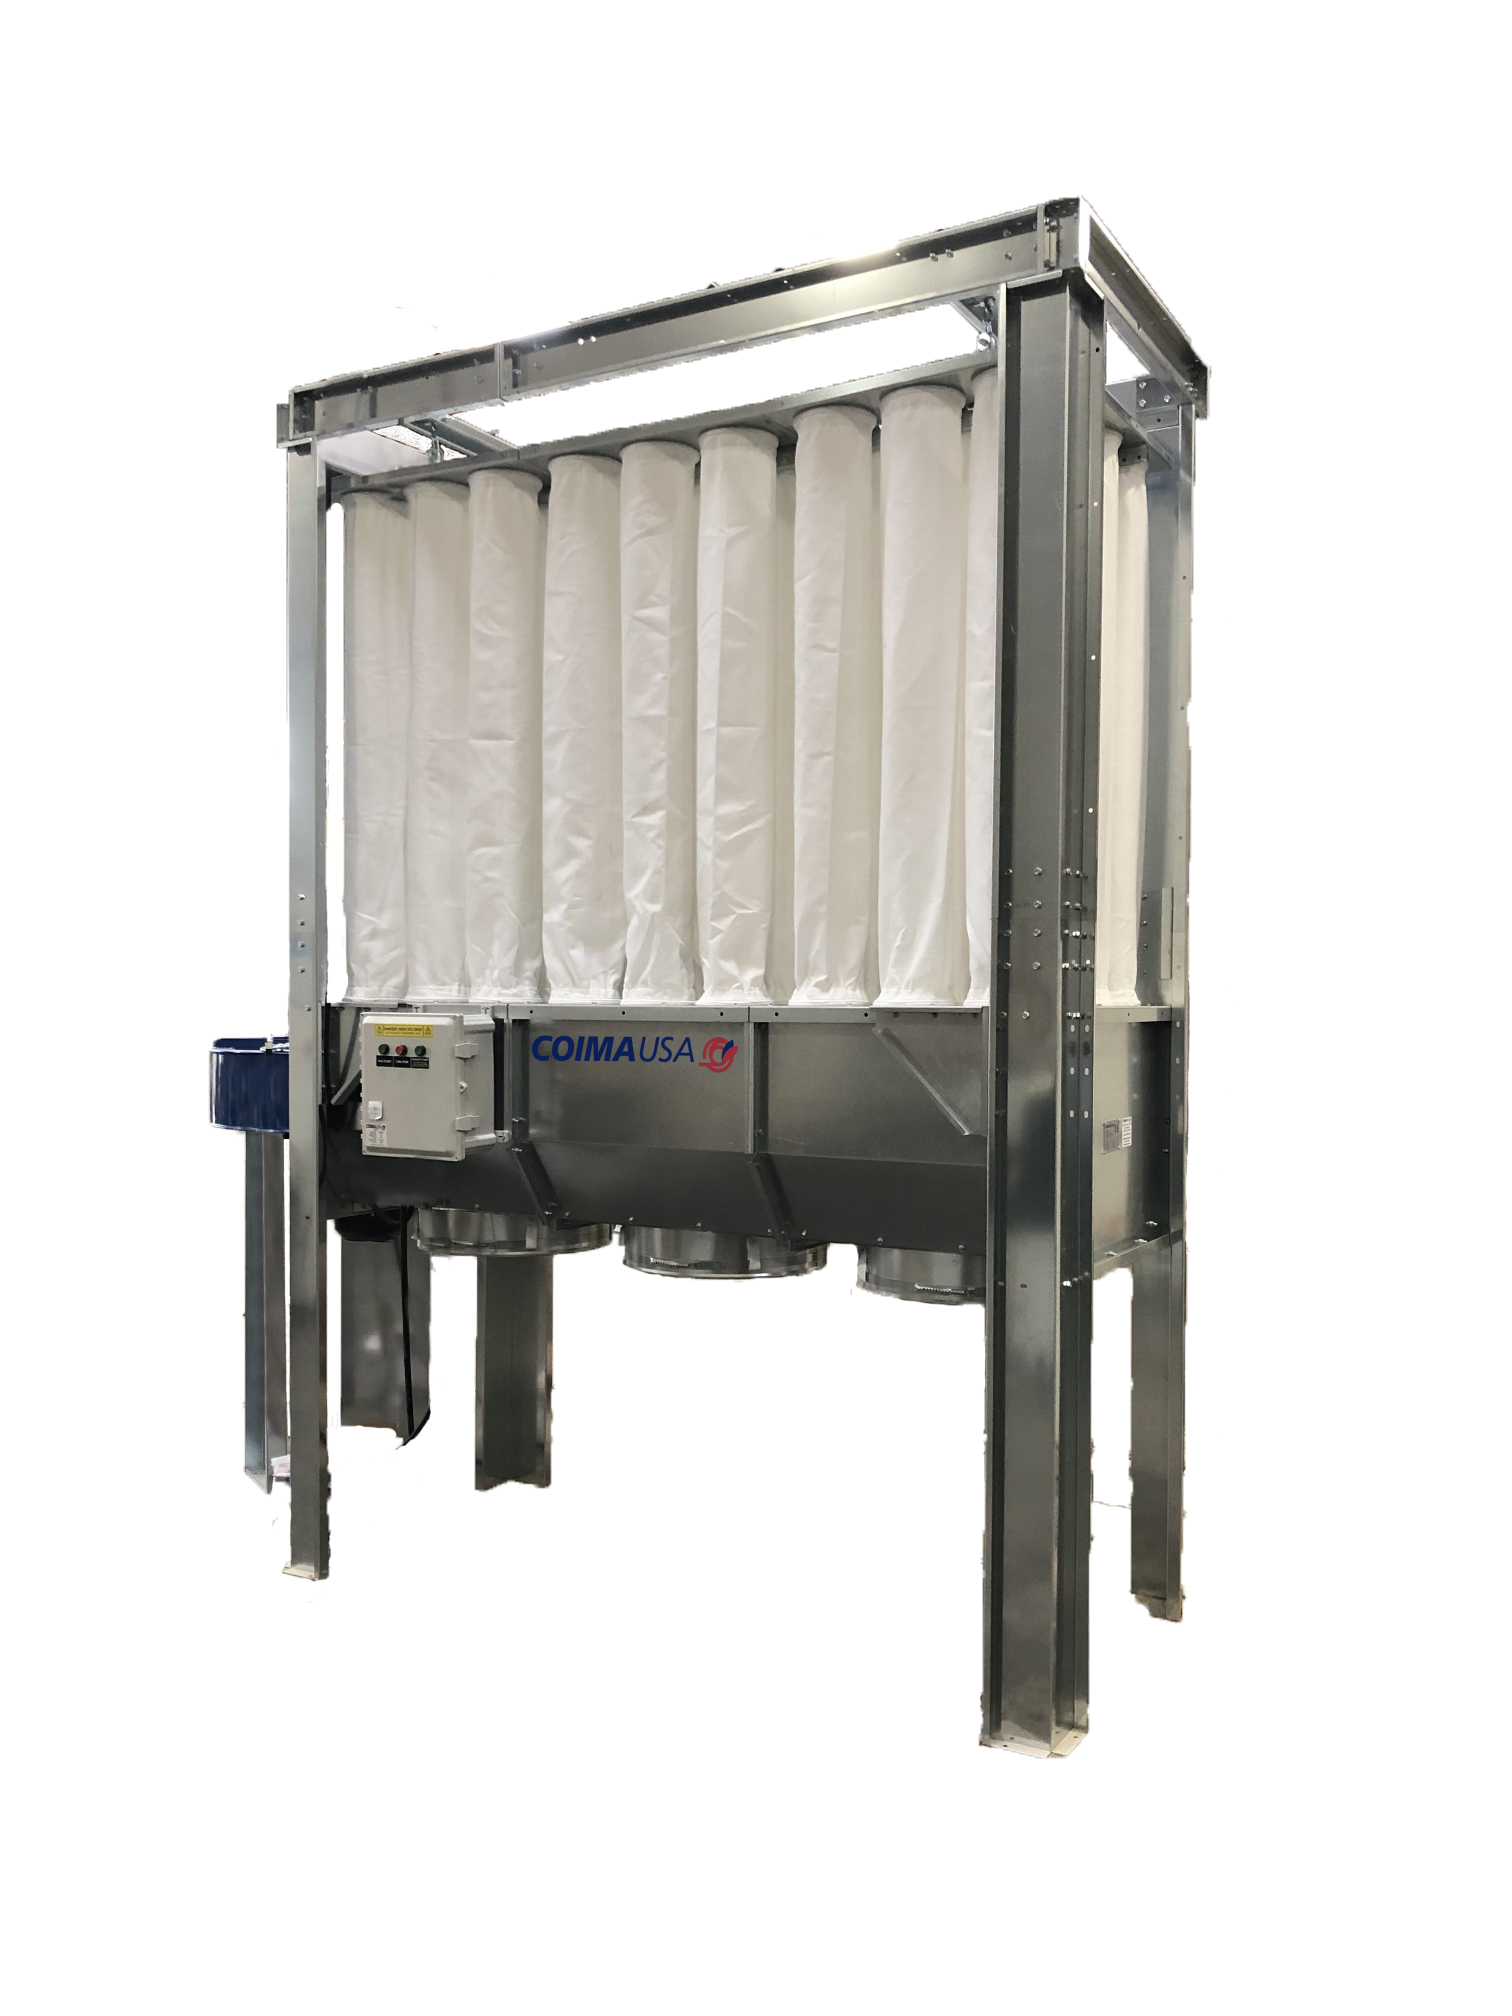 Dust Collectors and Air Filtration Systems